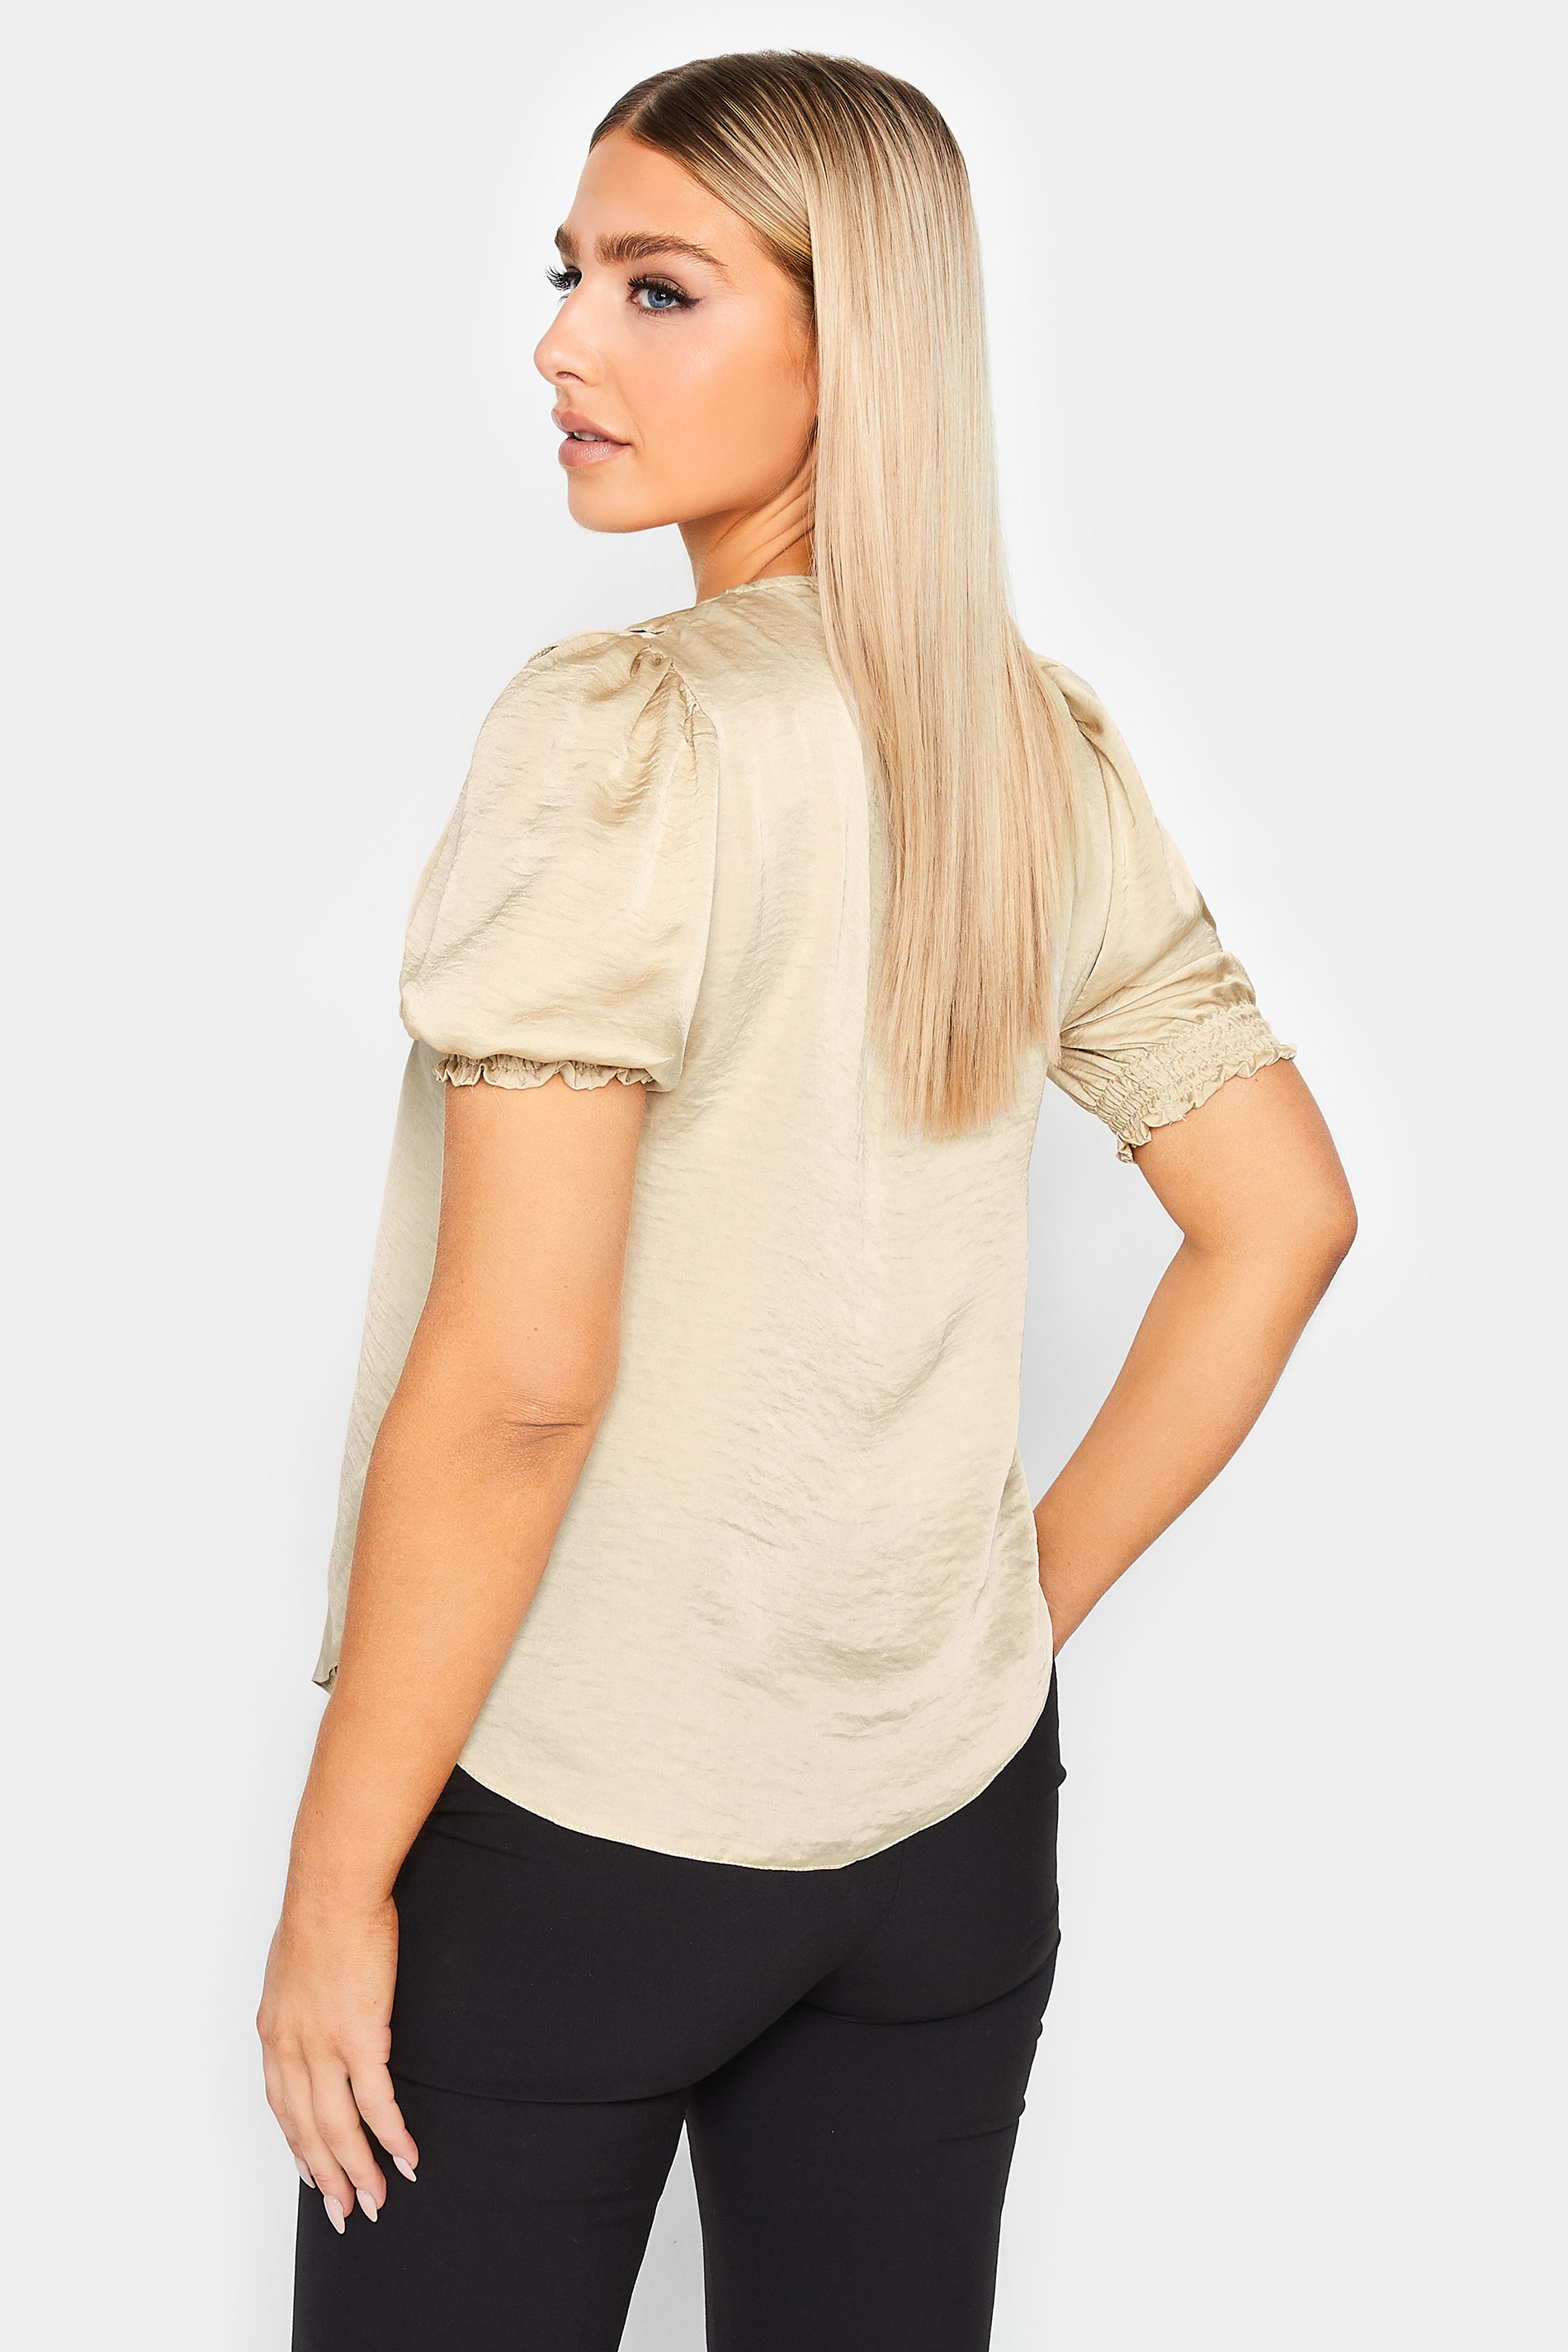 M&Co Gold Frill Front Blouse | M&Co